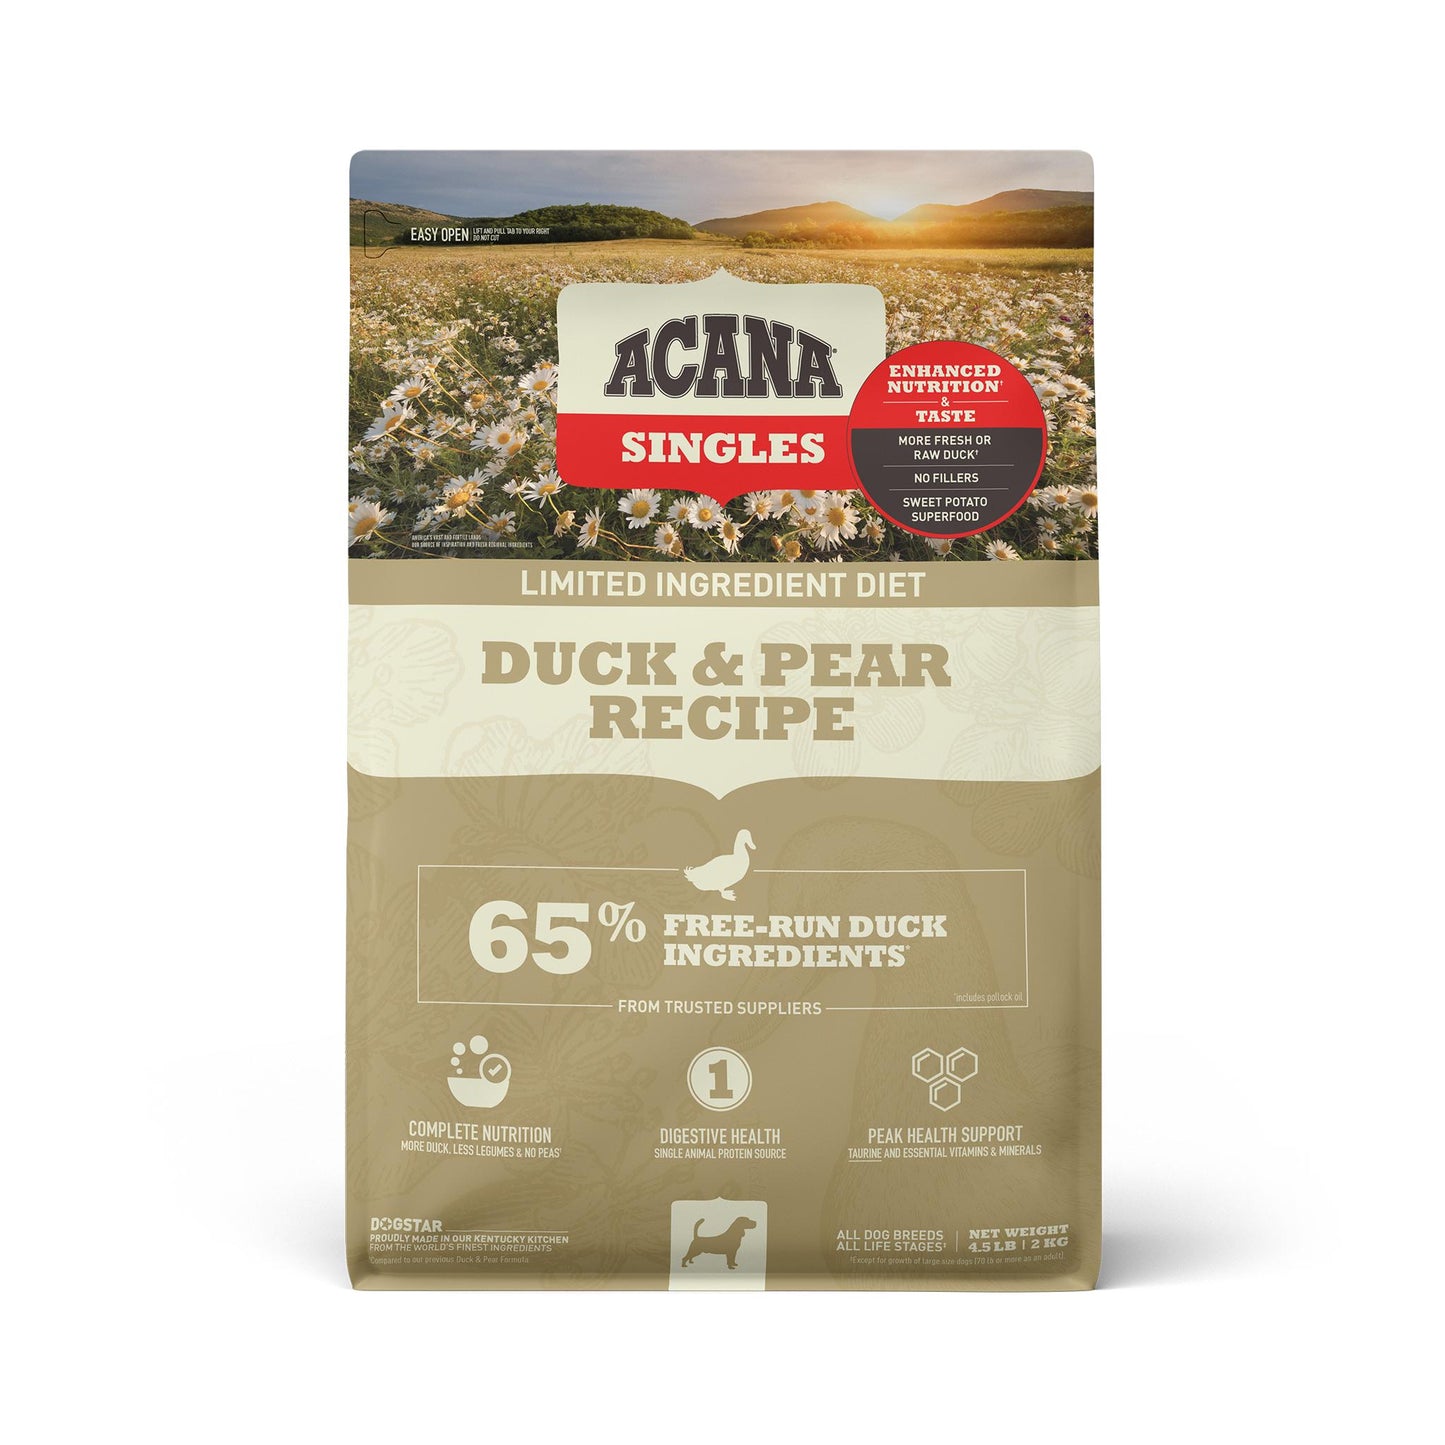 ACANA Singles Limited Ingredient Duck & Pear Grain-Free Dry Dog Food, 4.5-lb